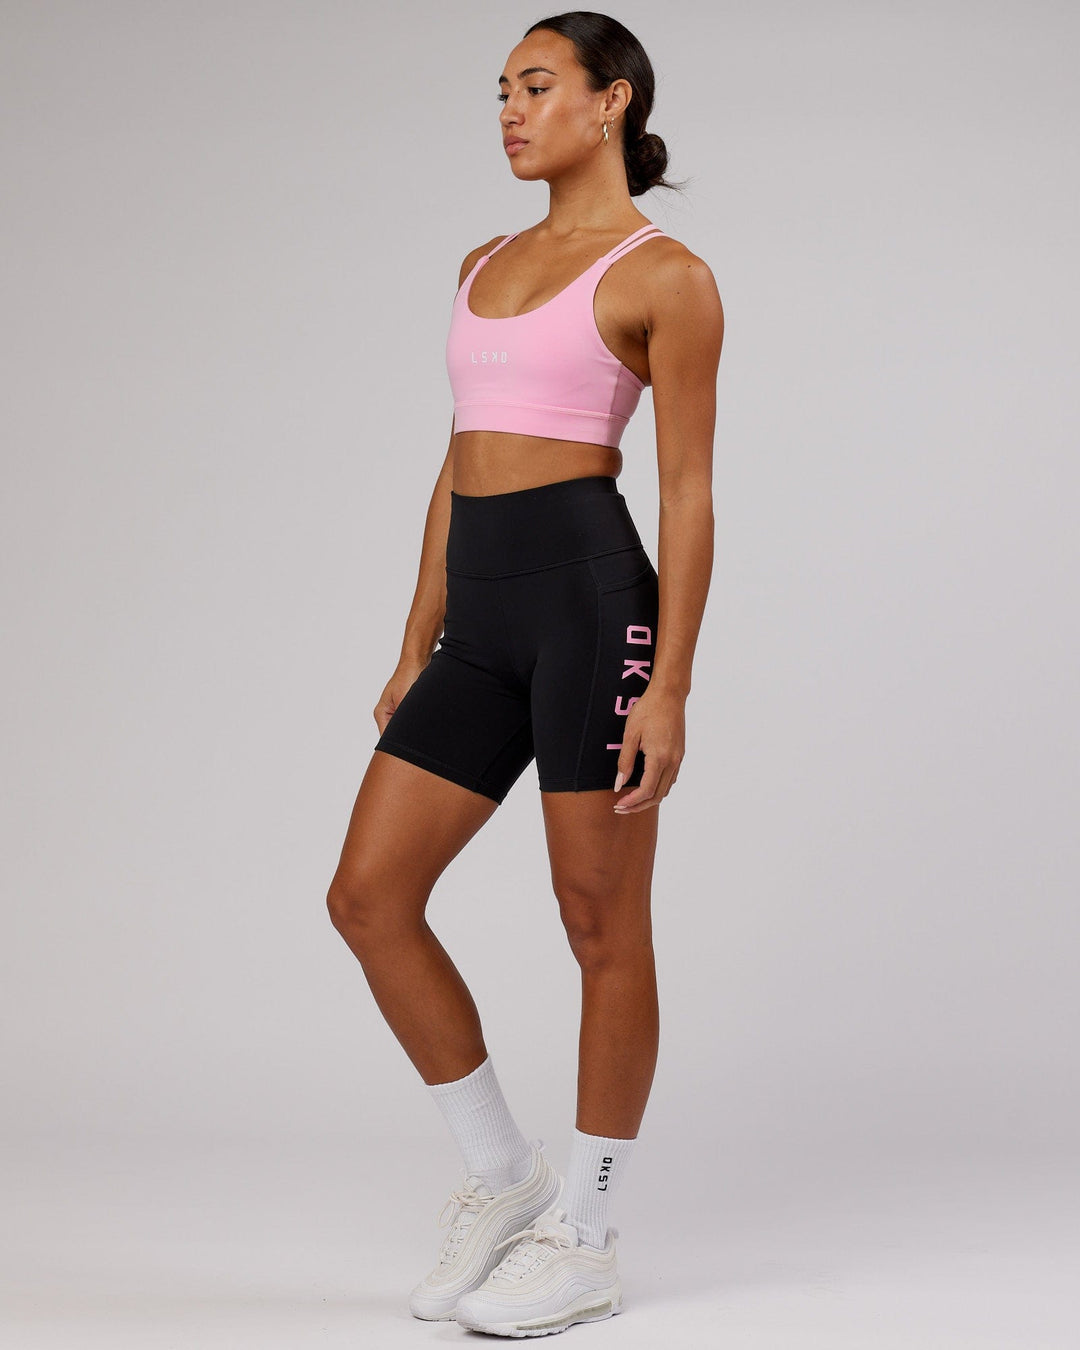 Rep Mid Short Tights - Black-Pink Frosting